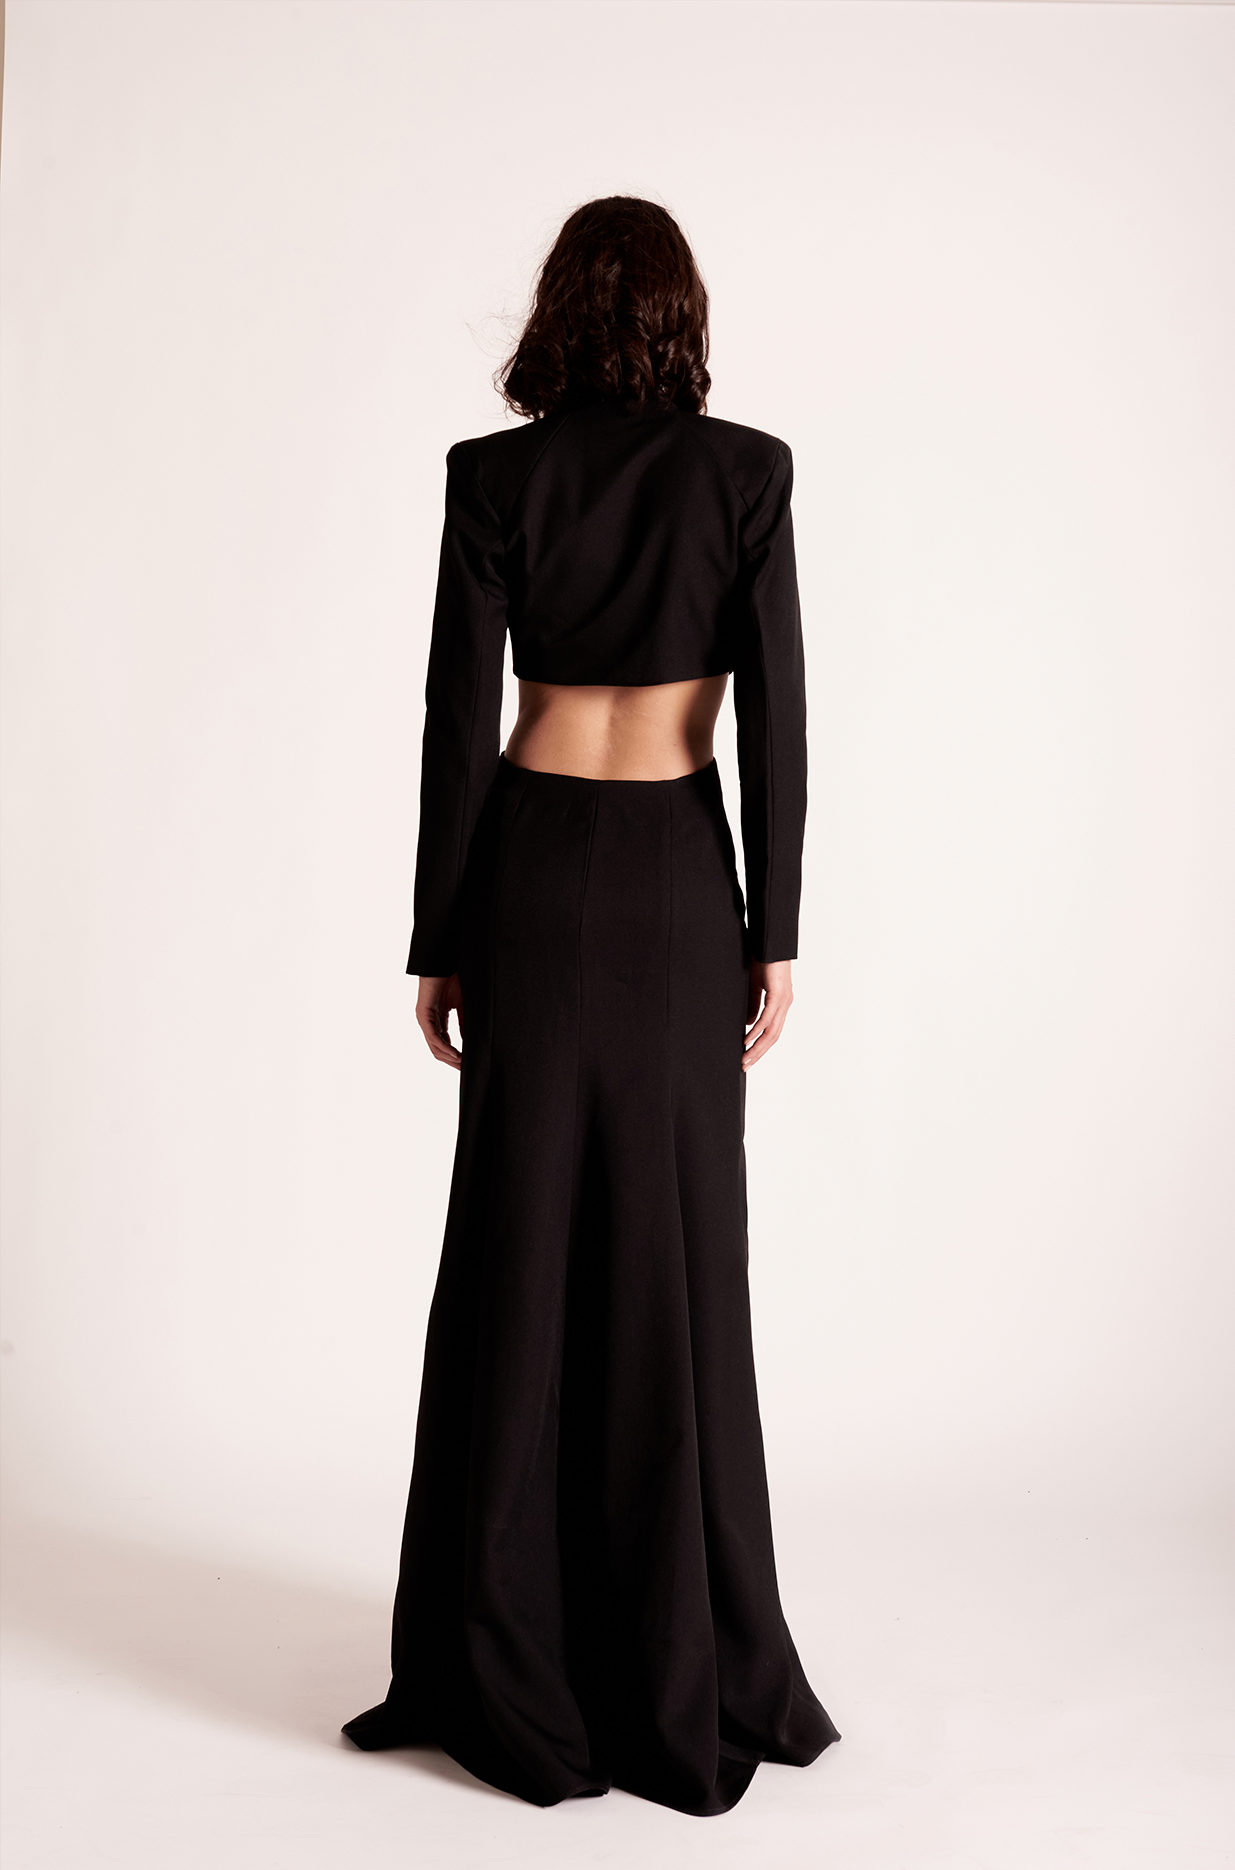 THE MUSE GOWN IN BLACK